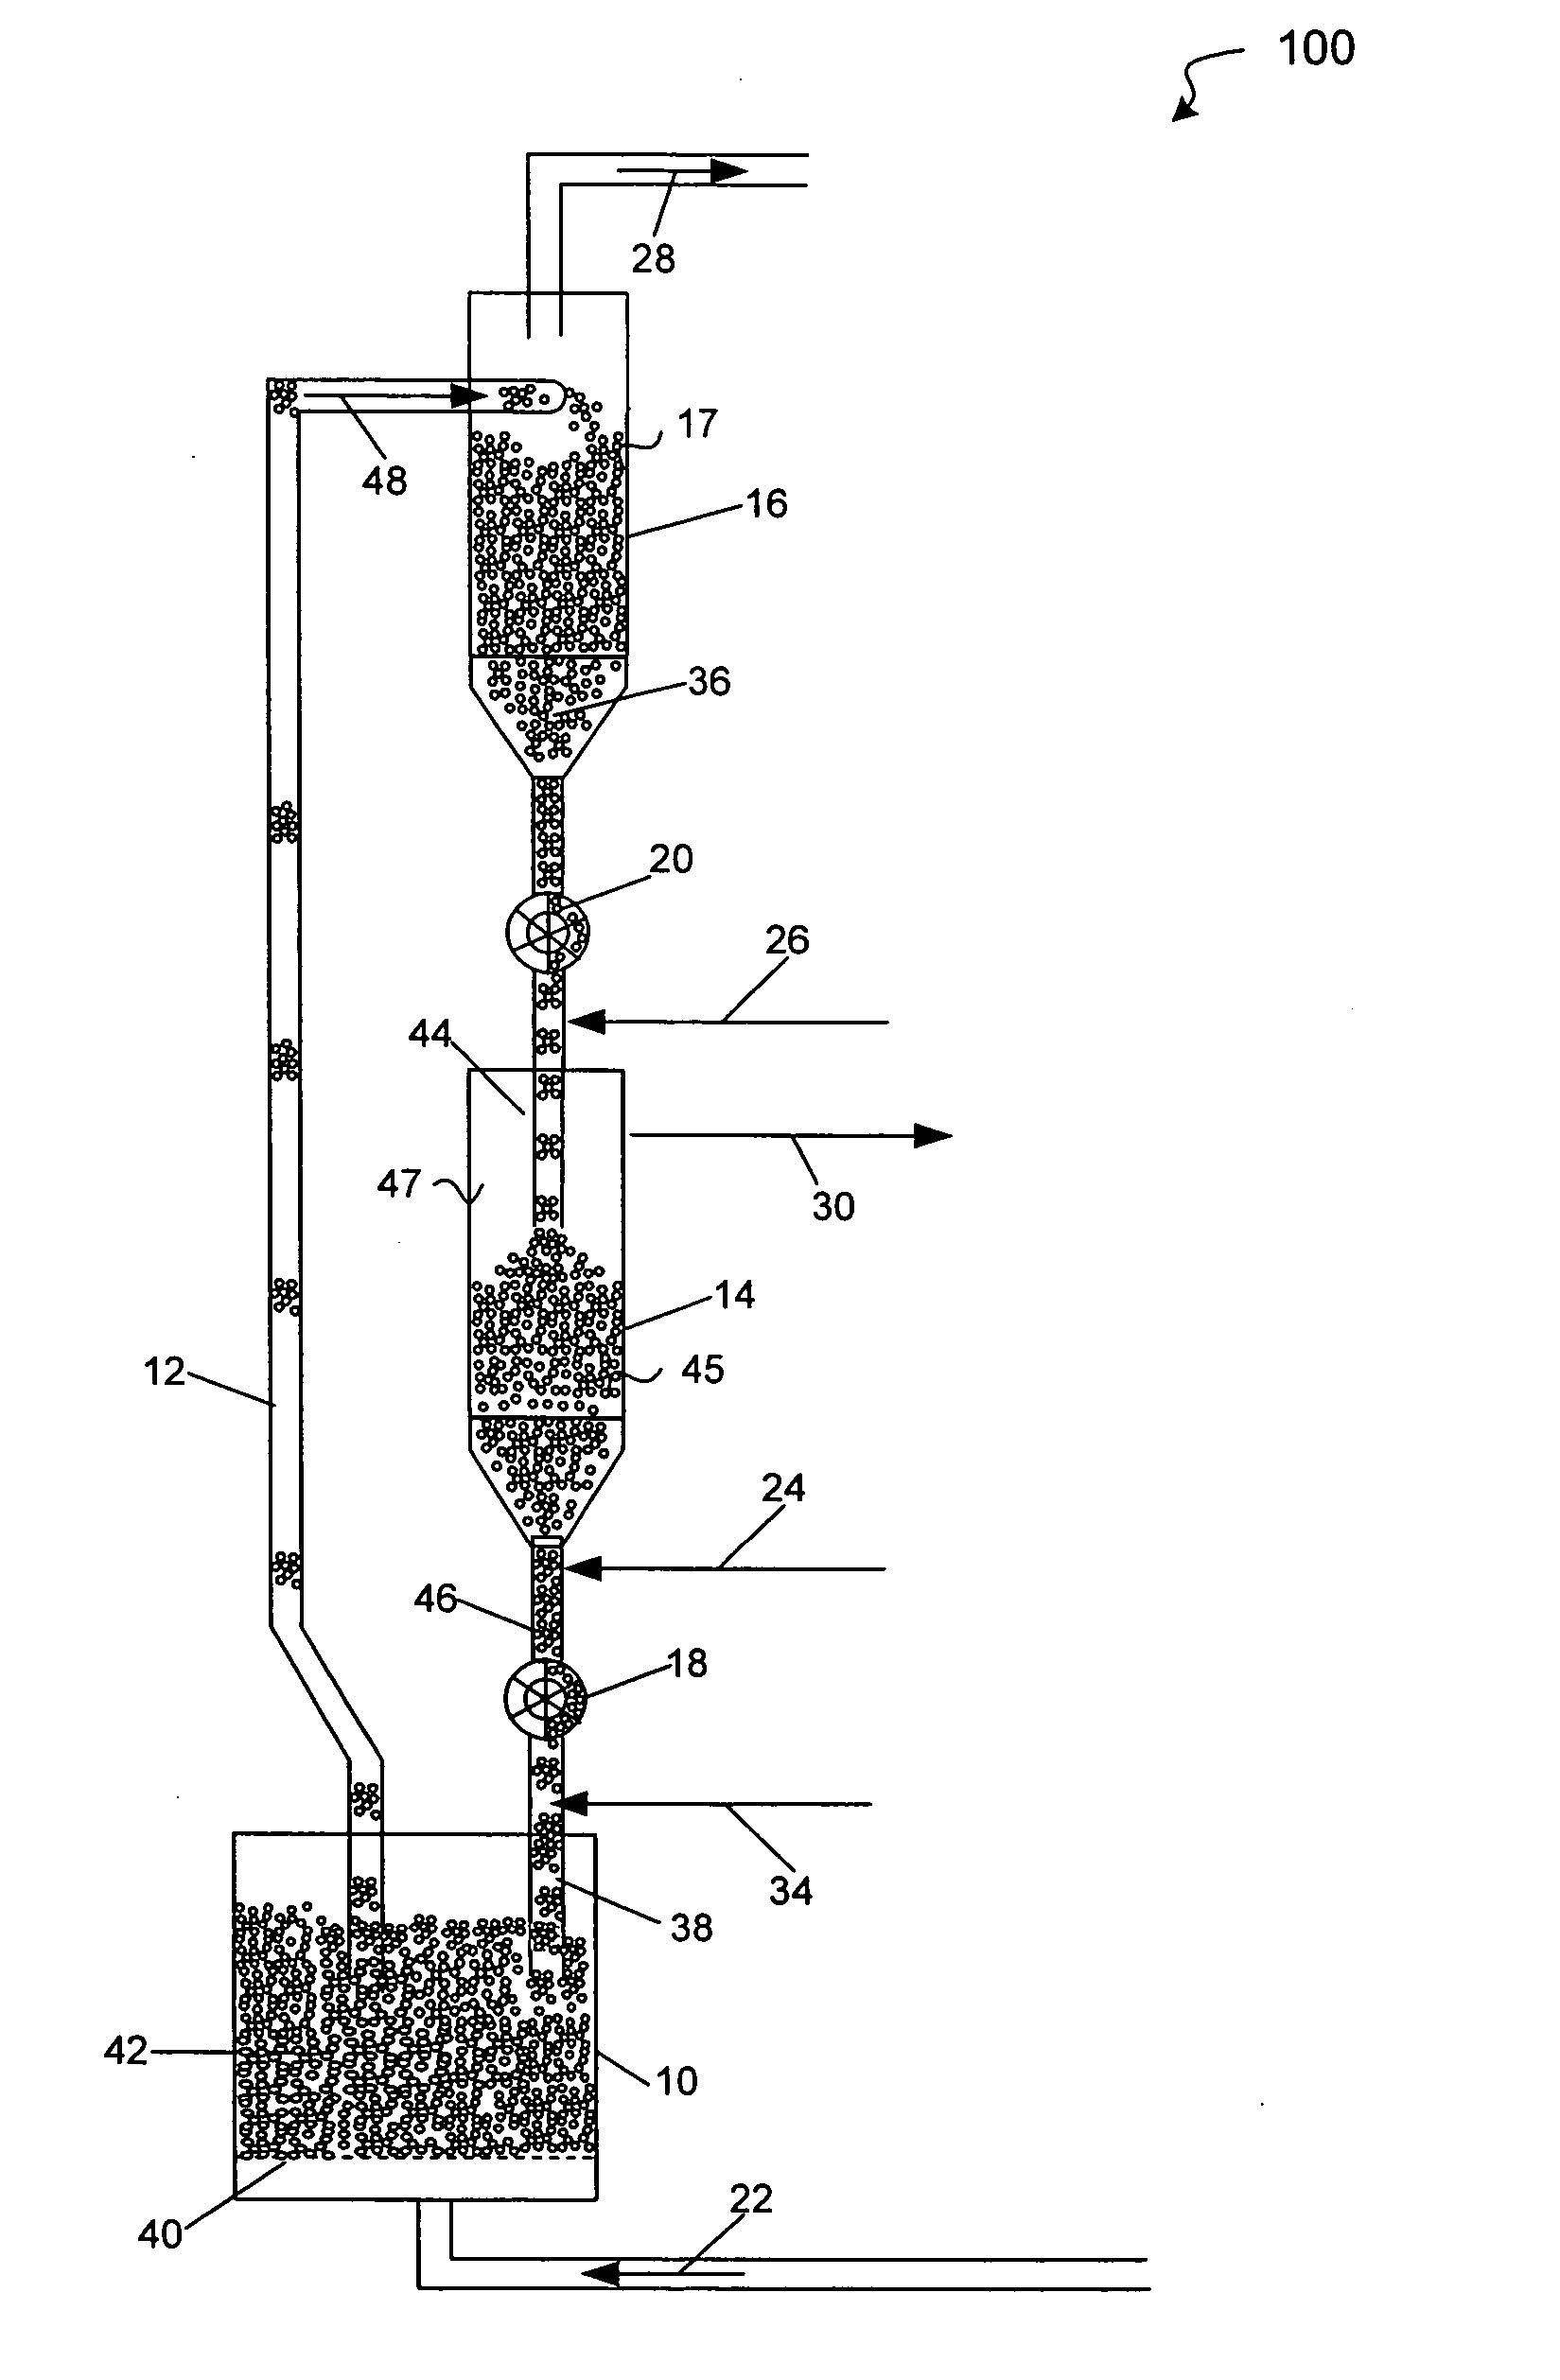 Particle separation system